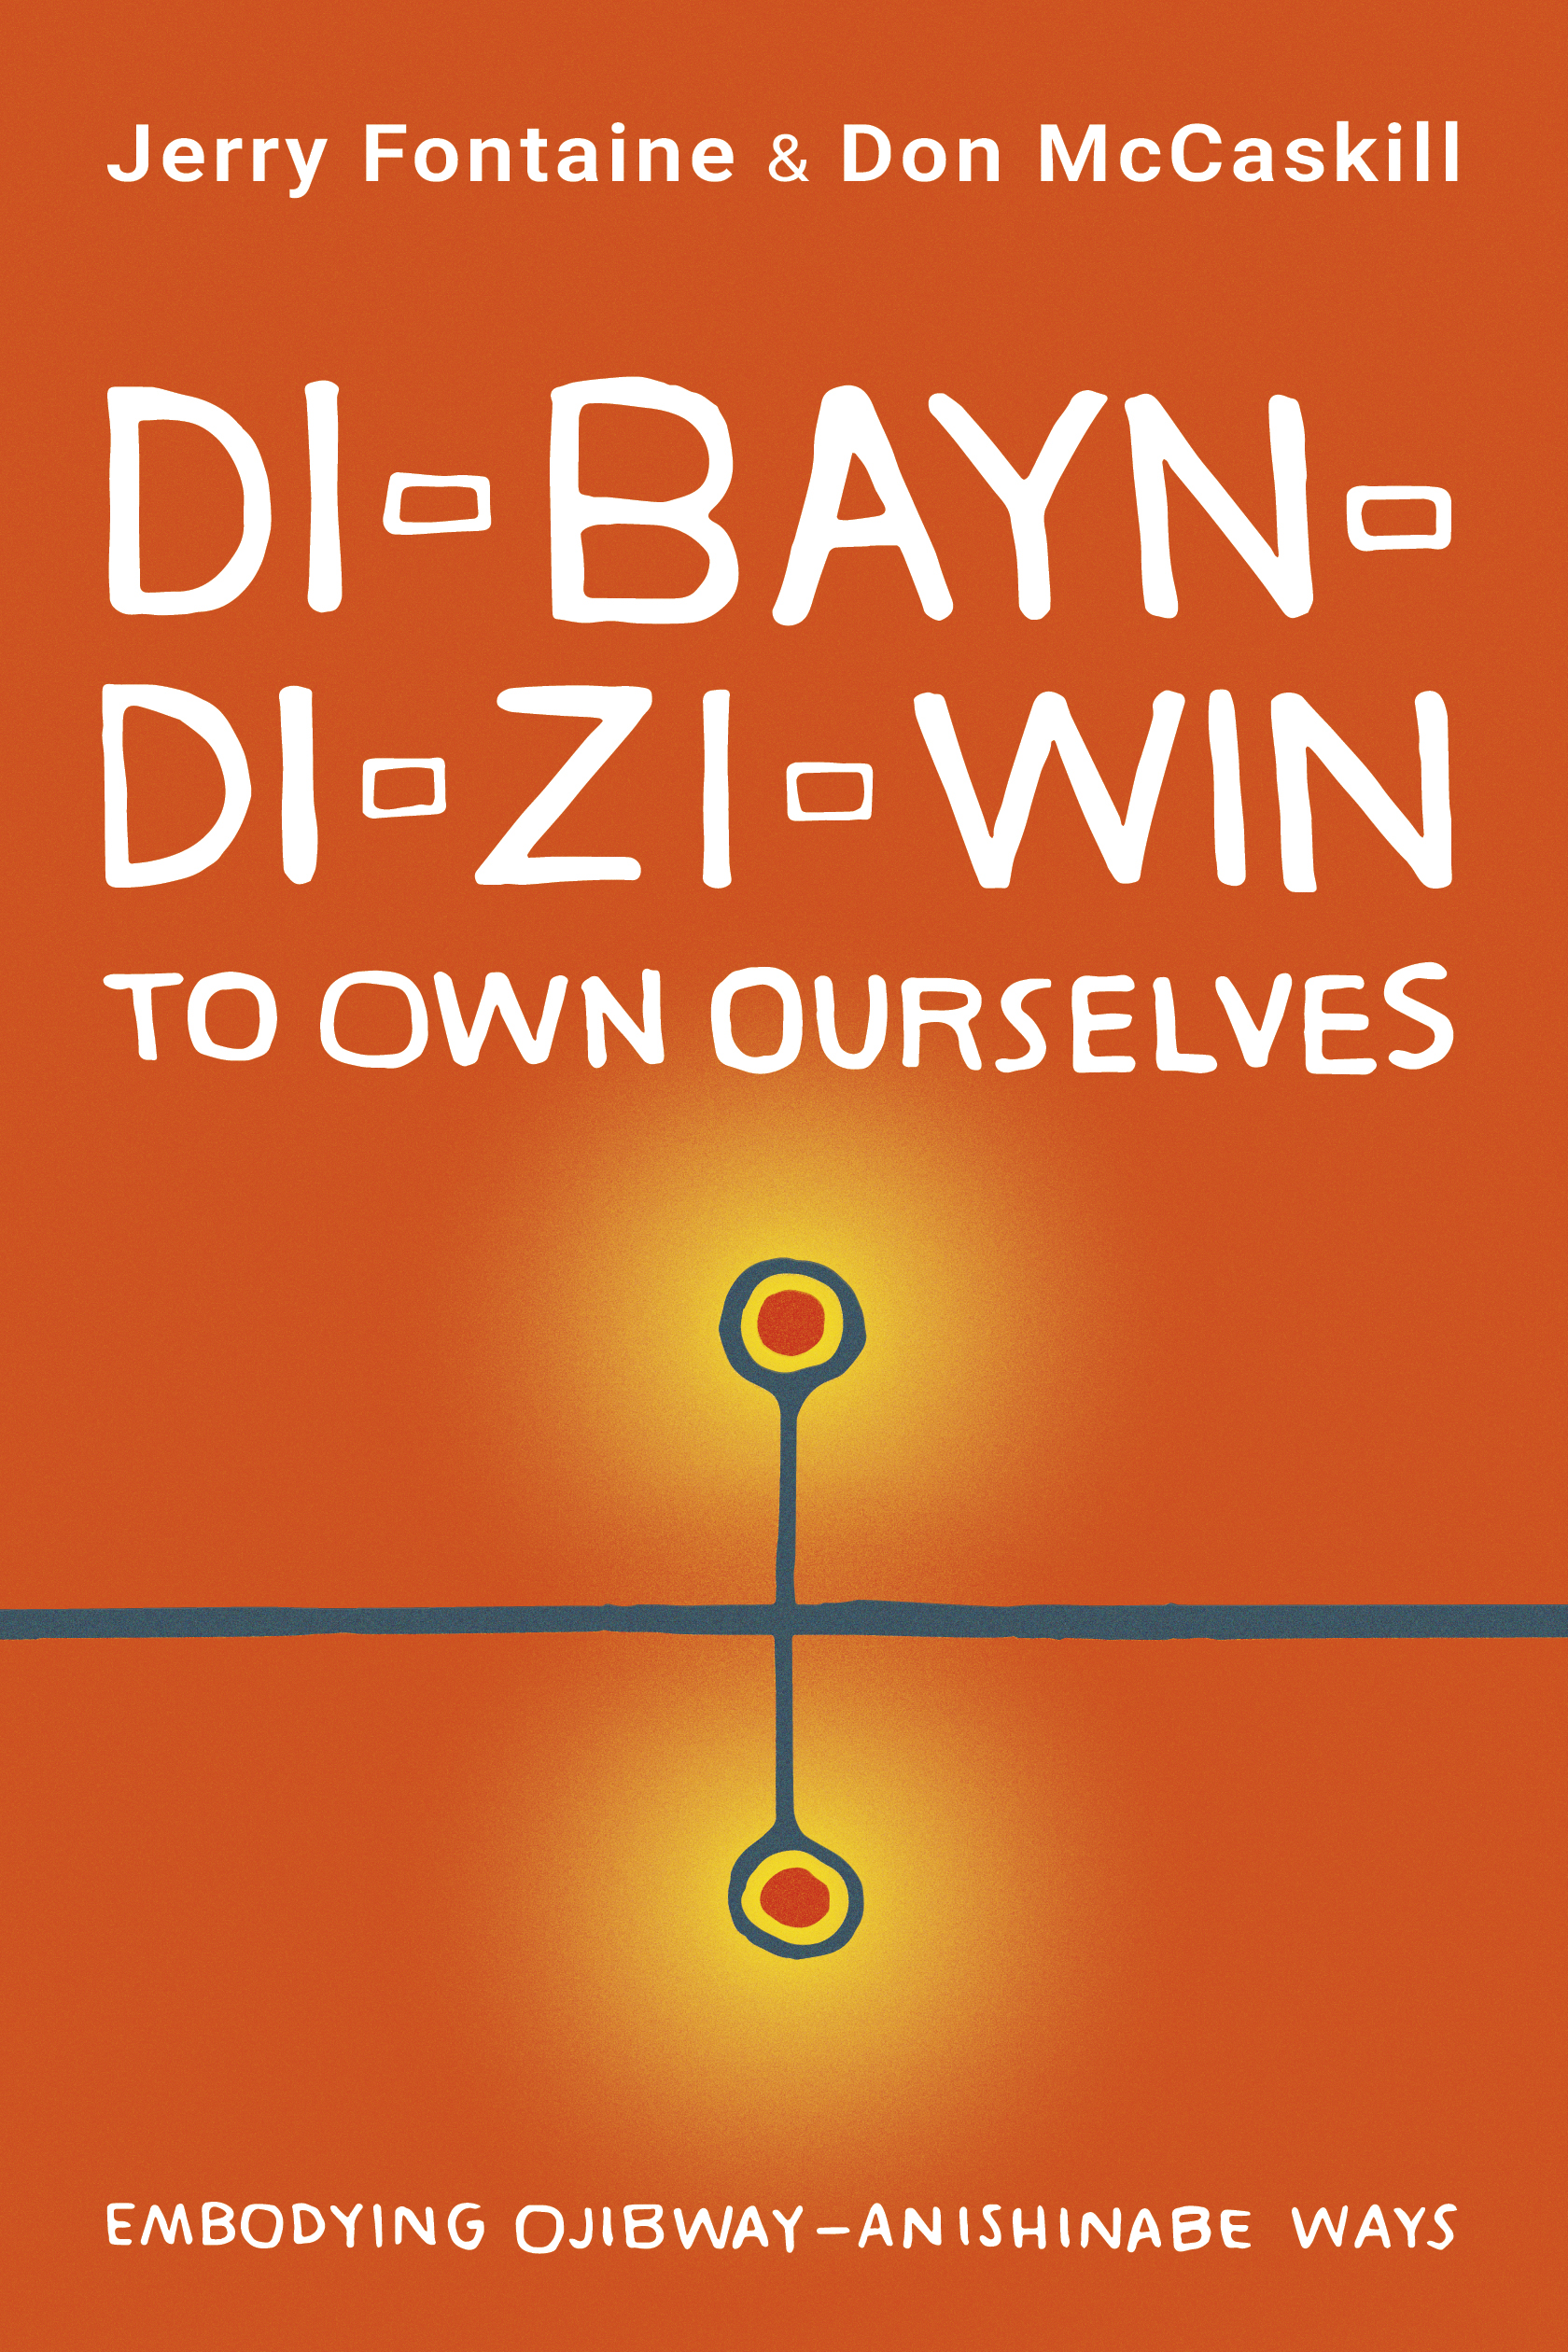 Di-bayn-di-zi-win (To Own Ourselves): Embodying Ojibway-Anishinabe Ways by Jerry Fontaine and Don McCaskill